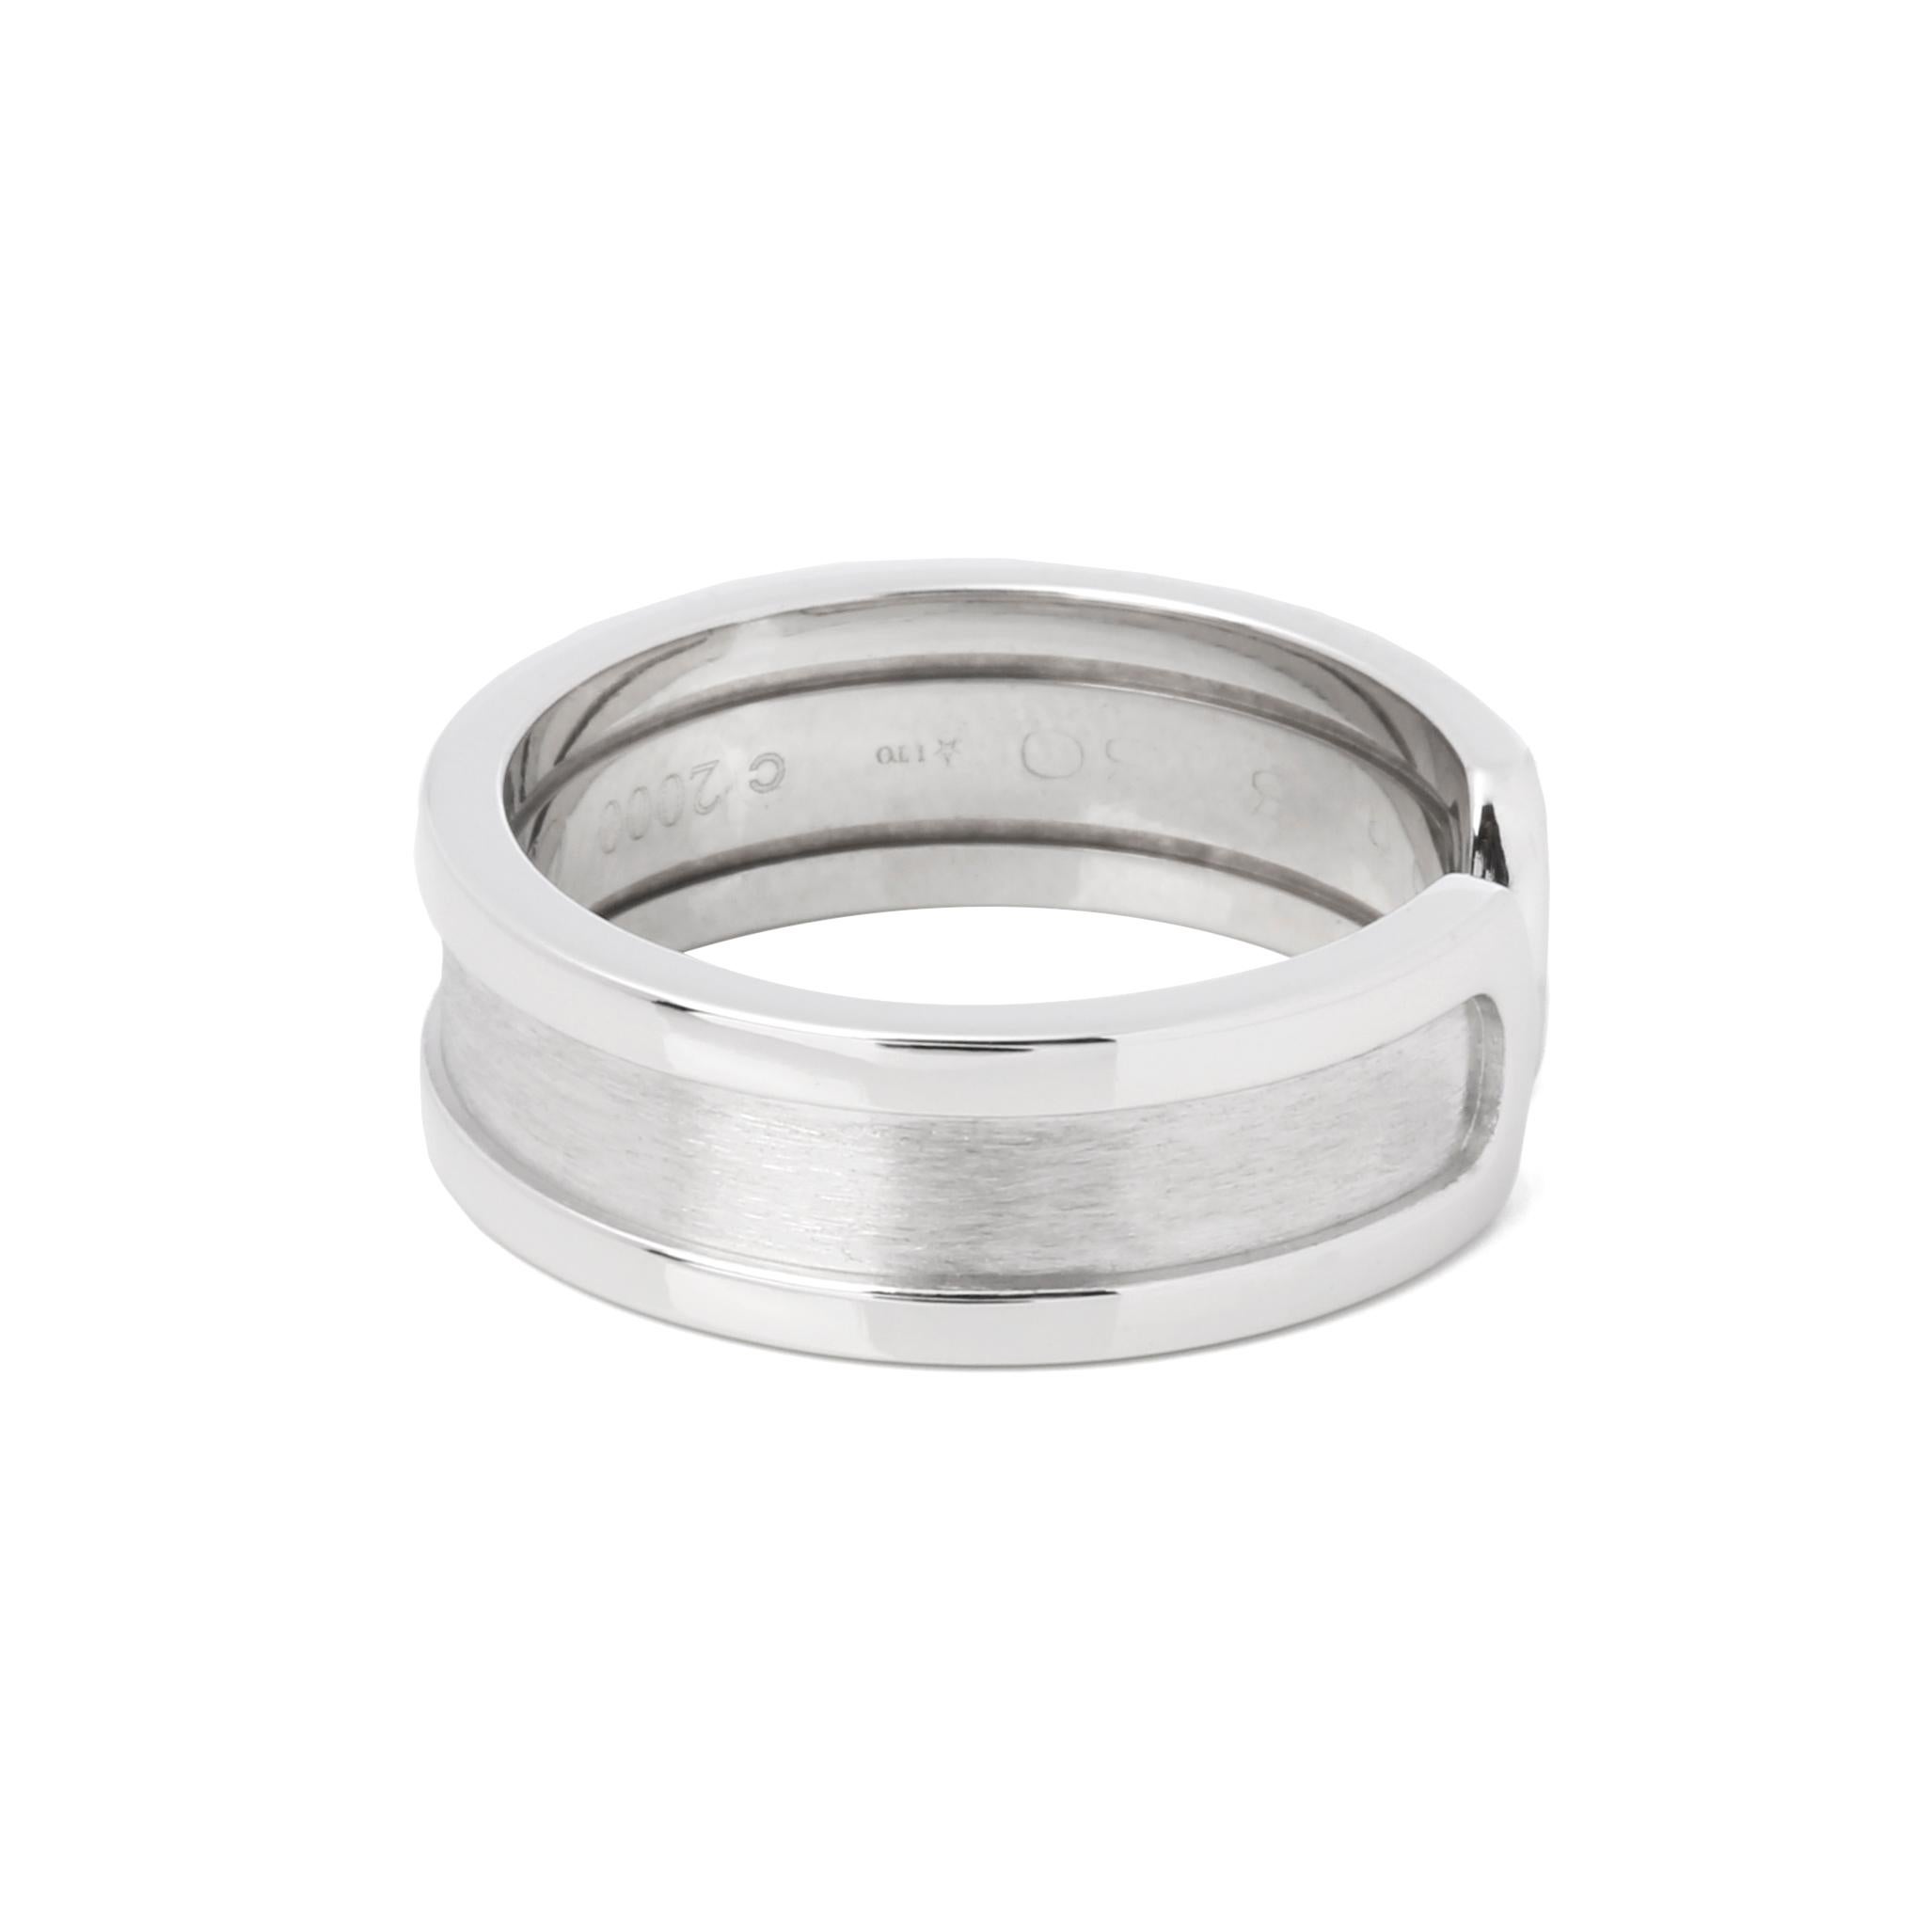 This ring by Cartier is from their C de Cartier collection and features their signature C design, made in 18k white gold. UK ring size L. EU ring size 52. US ring size 6. Complete with a Xupes presentation box. Our Xupes reference is COMJ549 should